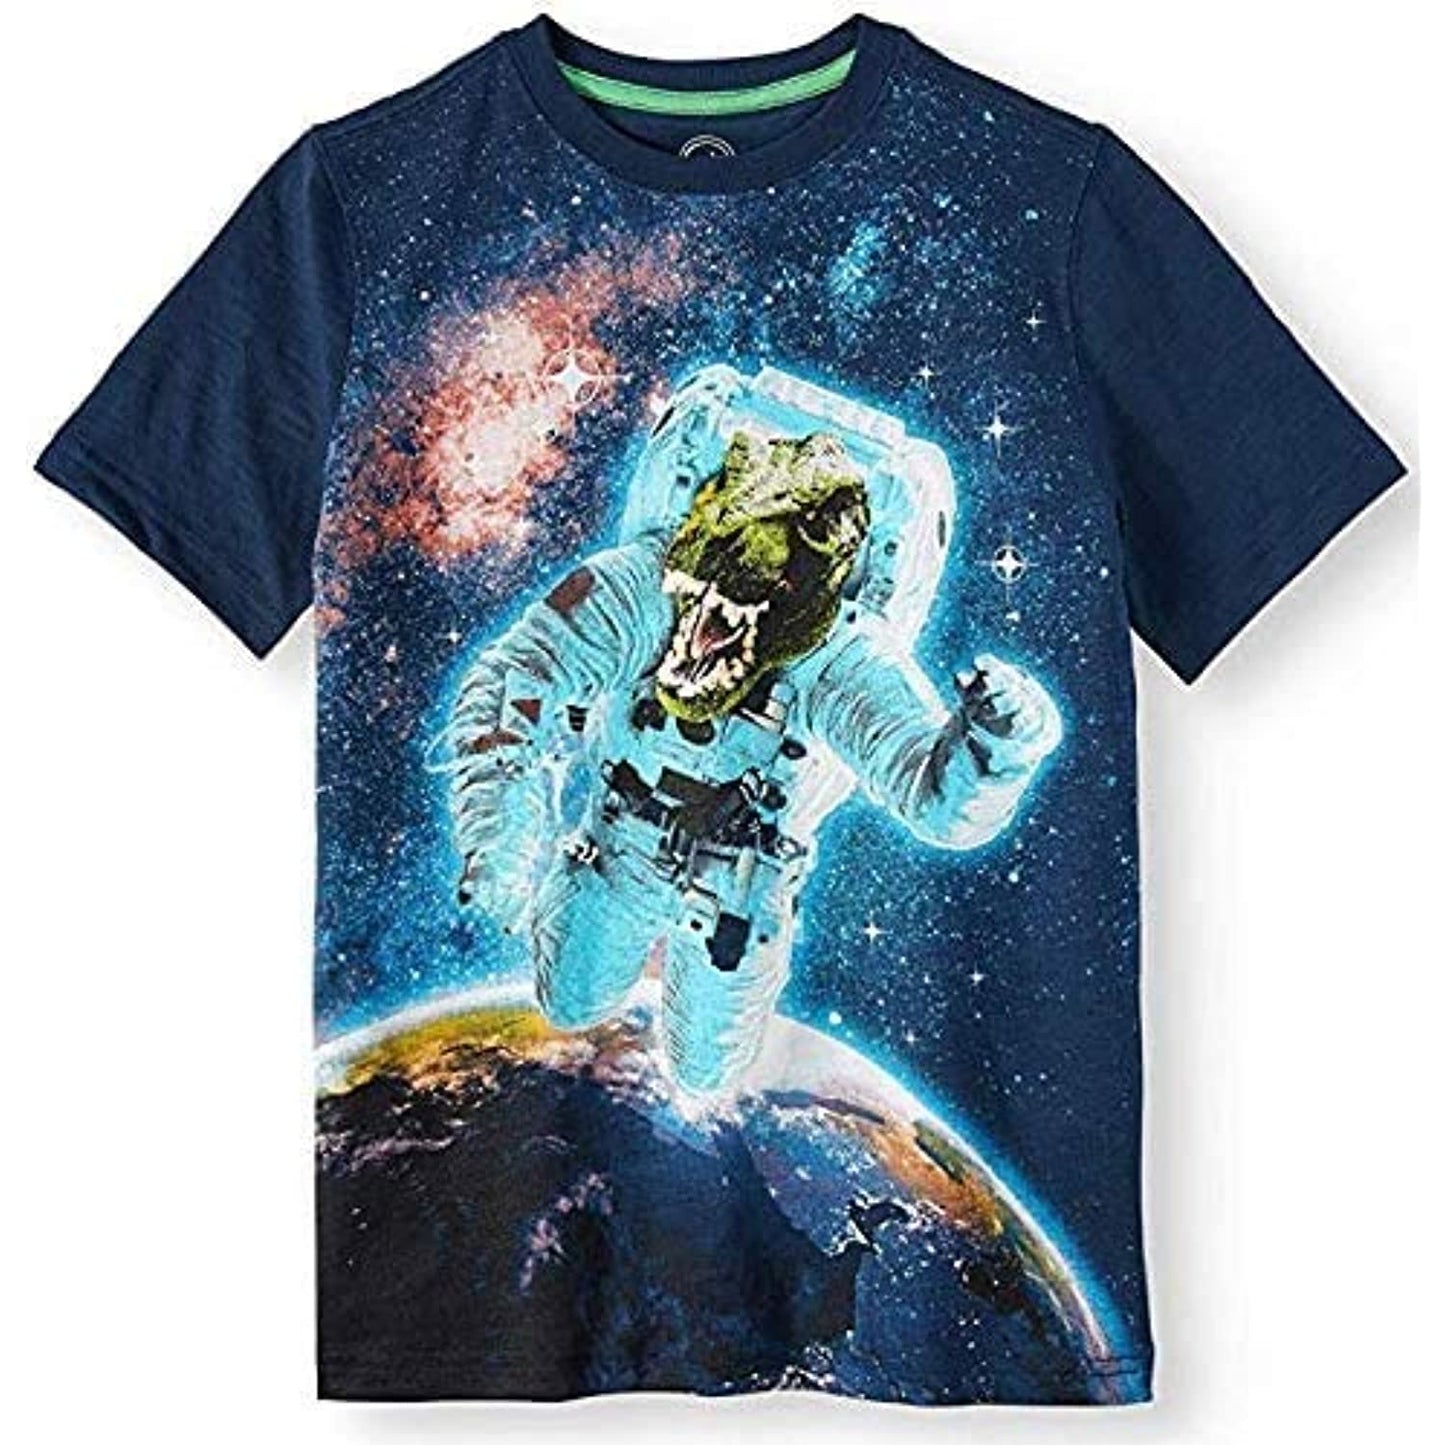 Boys' T-Rex Dinosaur Astronaut in Outer Space Graphic Short Sleeve Tee Shirt 18 XX-Large 18 Blue